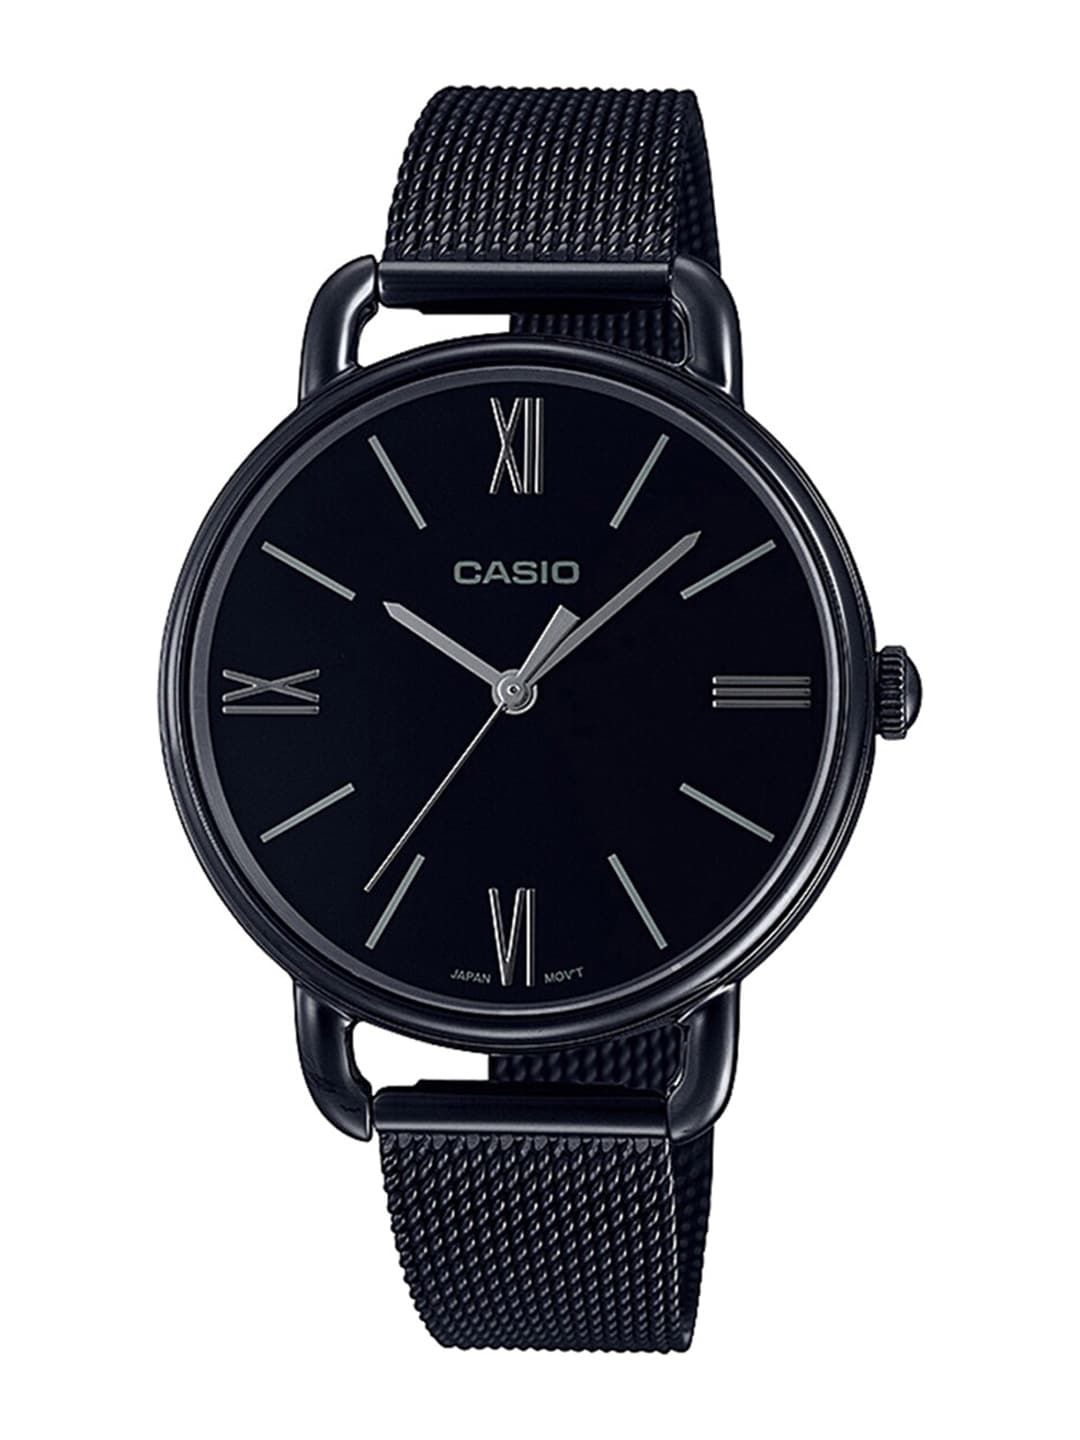 CASIO Enticer Ladies Black Analogue Watch A1804 Price in India